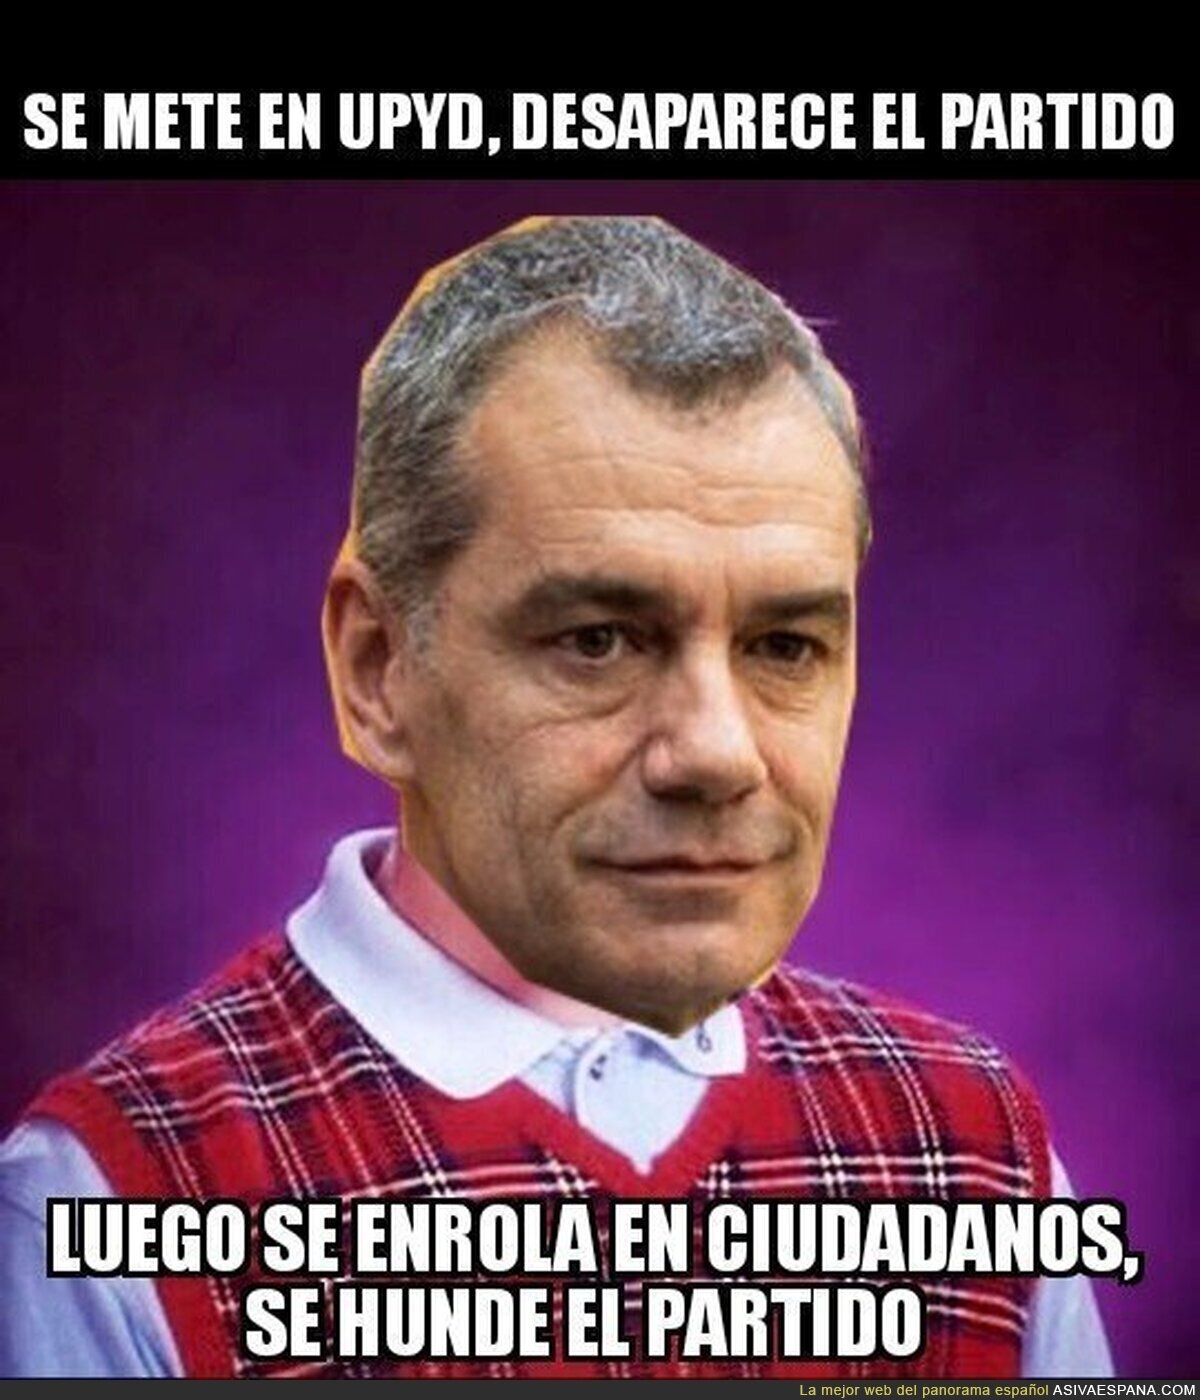 Bad luck Cantó